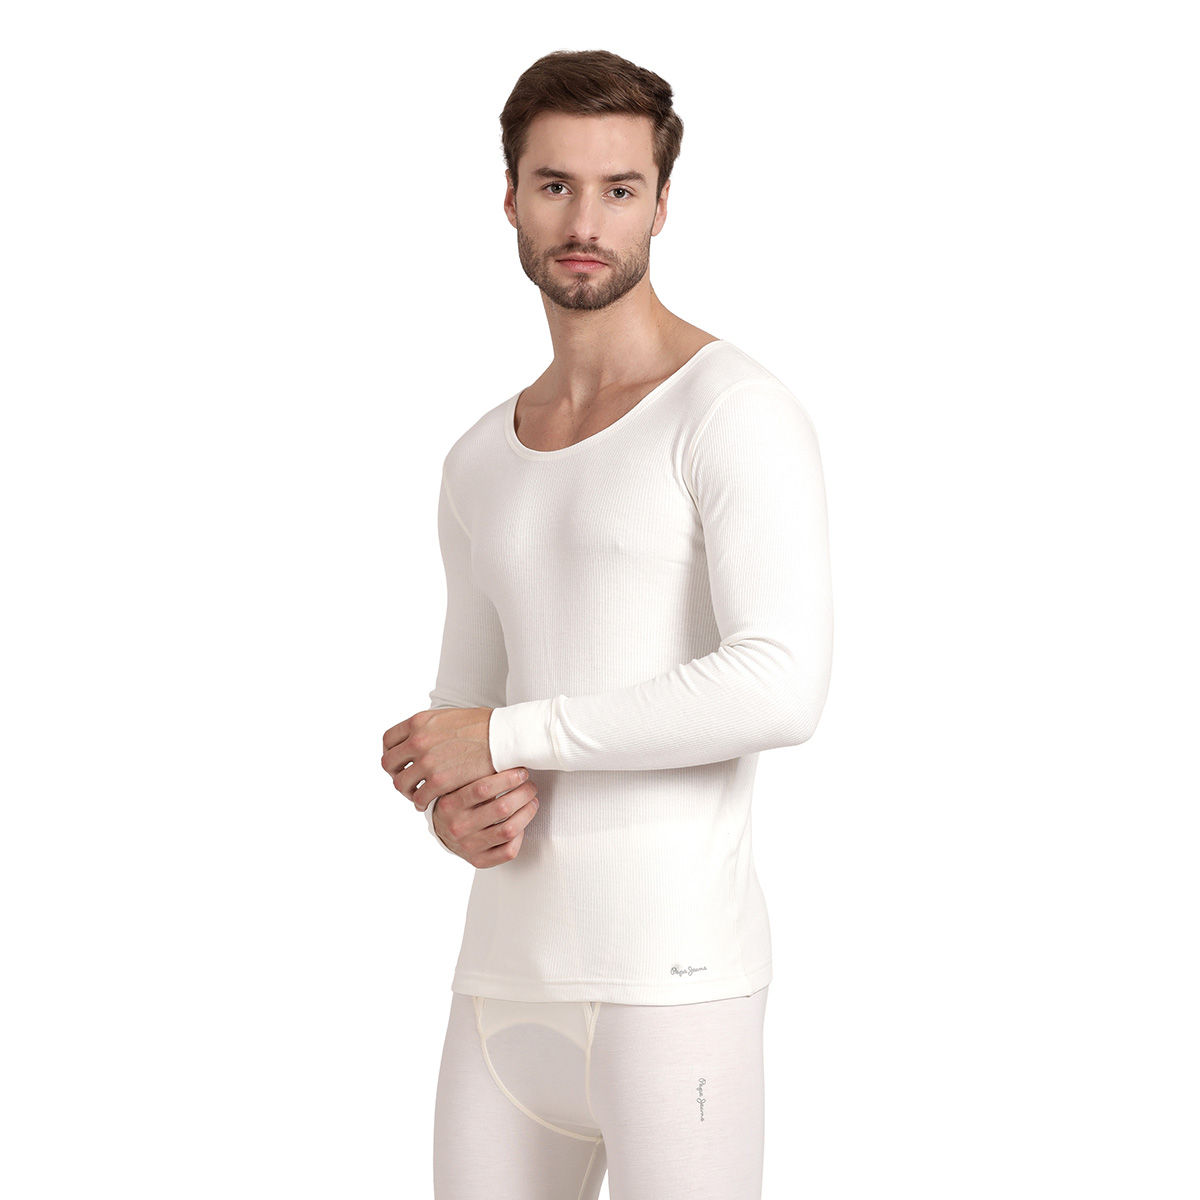 Pepe Jeans Solid Snug Fit Thermals Off White: Buy Pepe Jeans Solid Snug ...